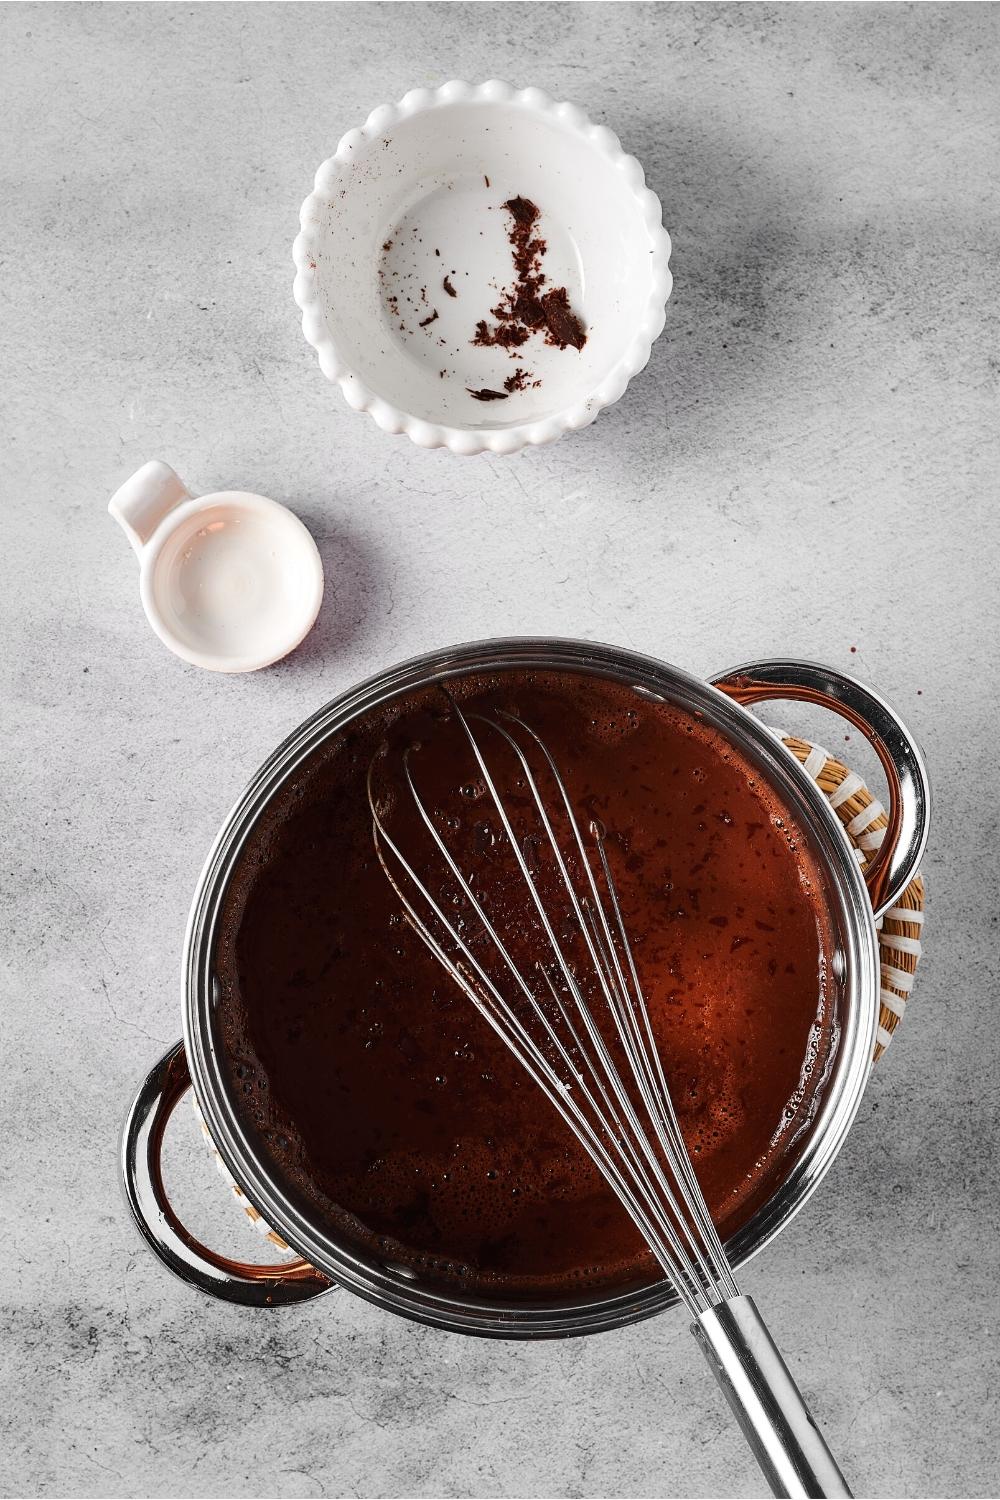 A pot filled with hot chocolate with a whisk in it. Behind it is two empty white bowls on a gray counter.